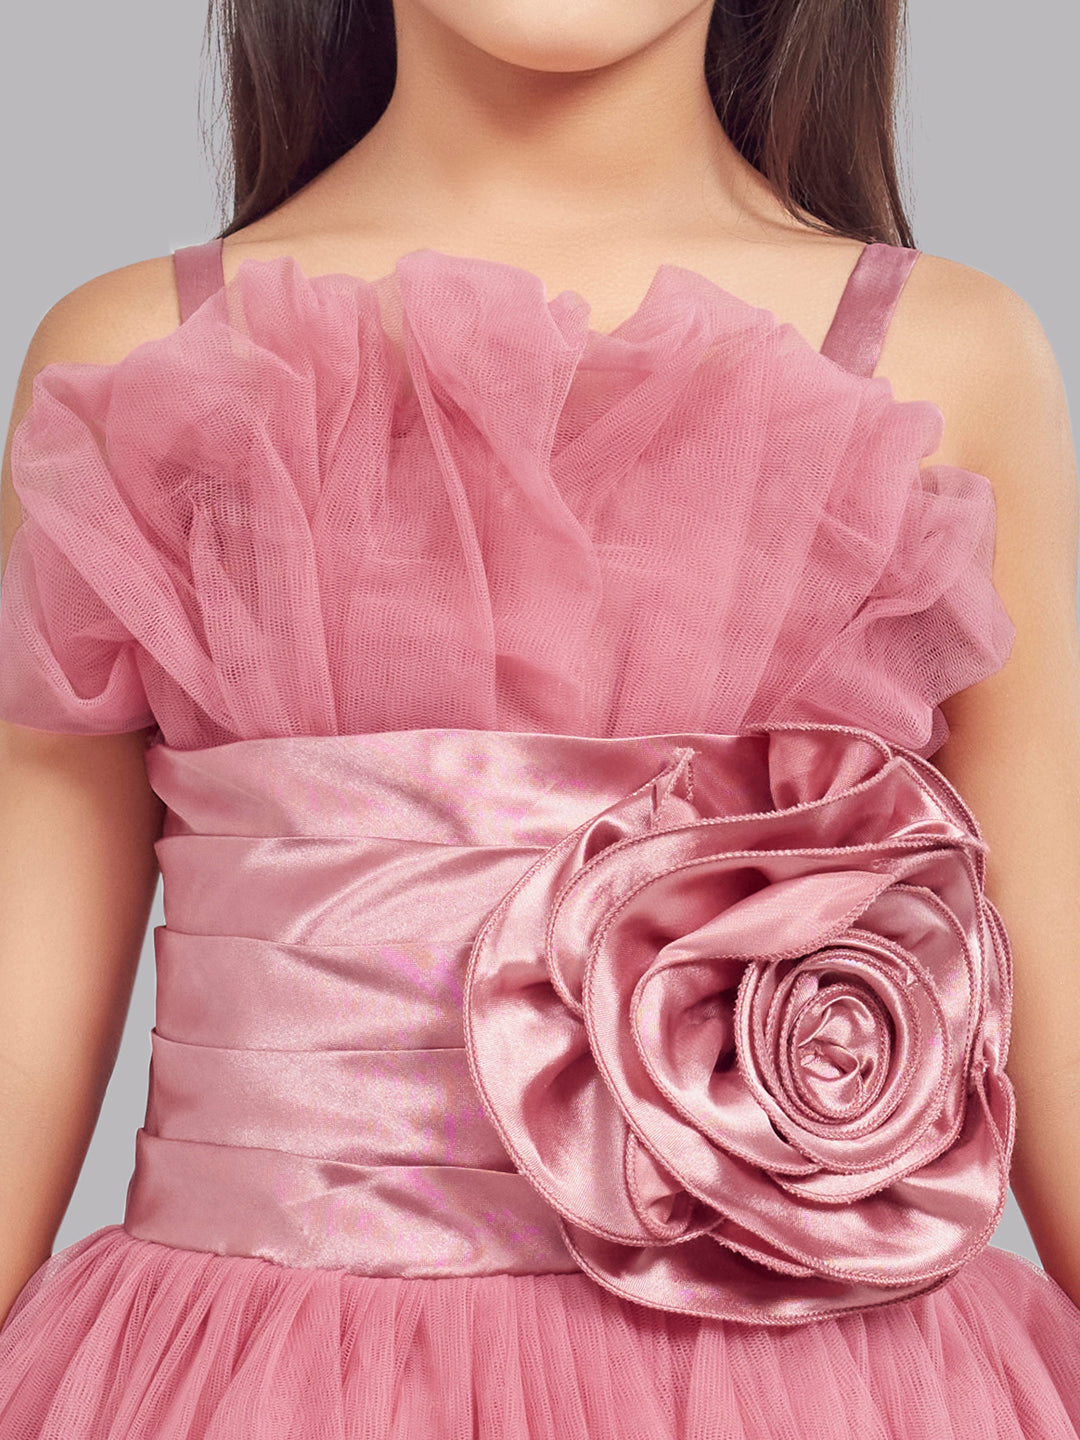 Ruffled Silhouette Party Gown - Rose